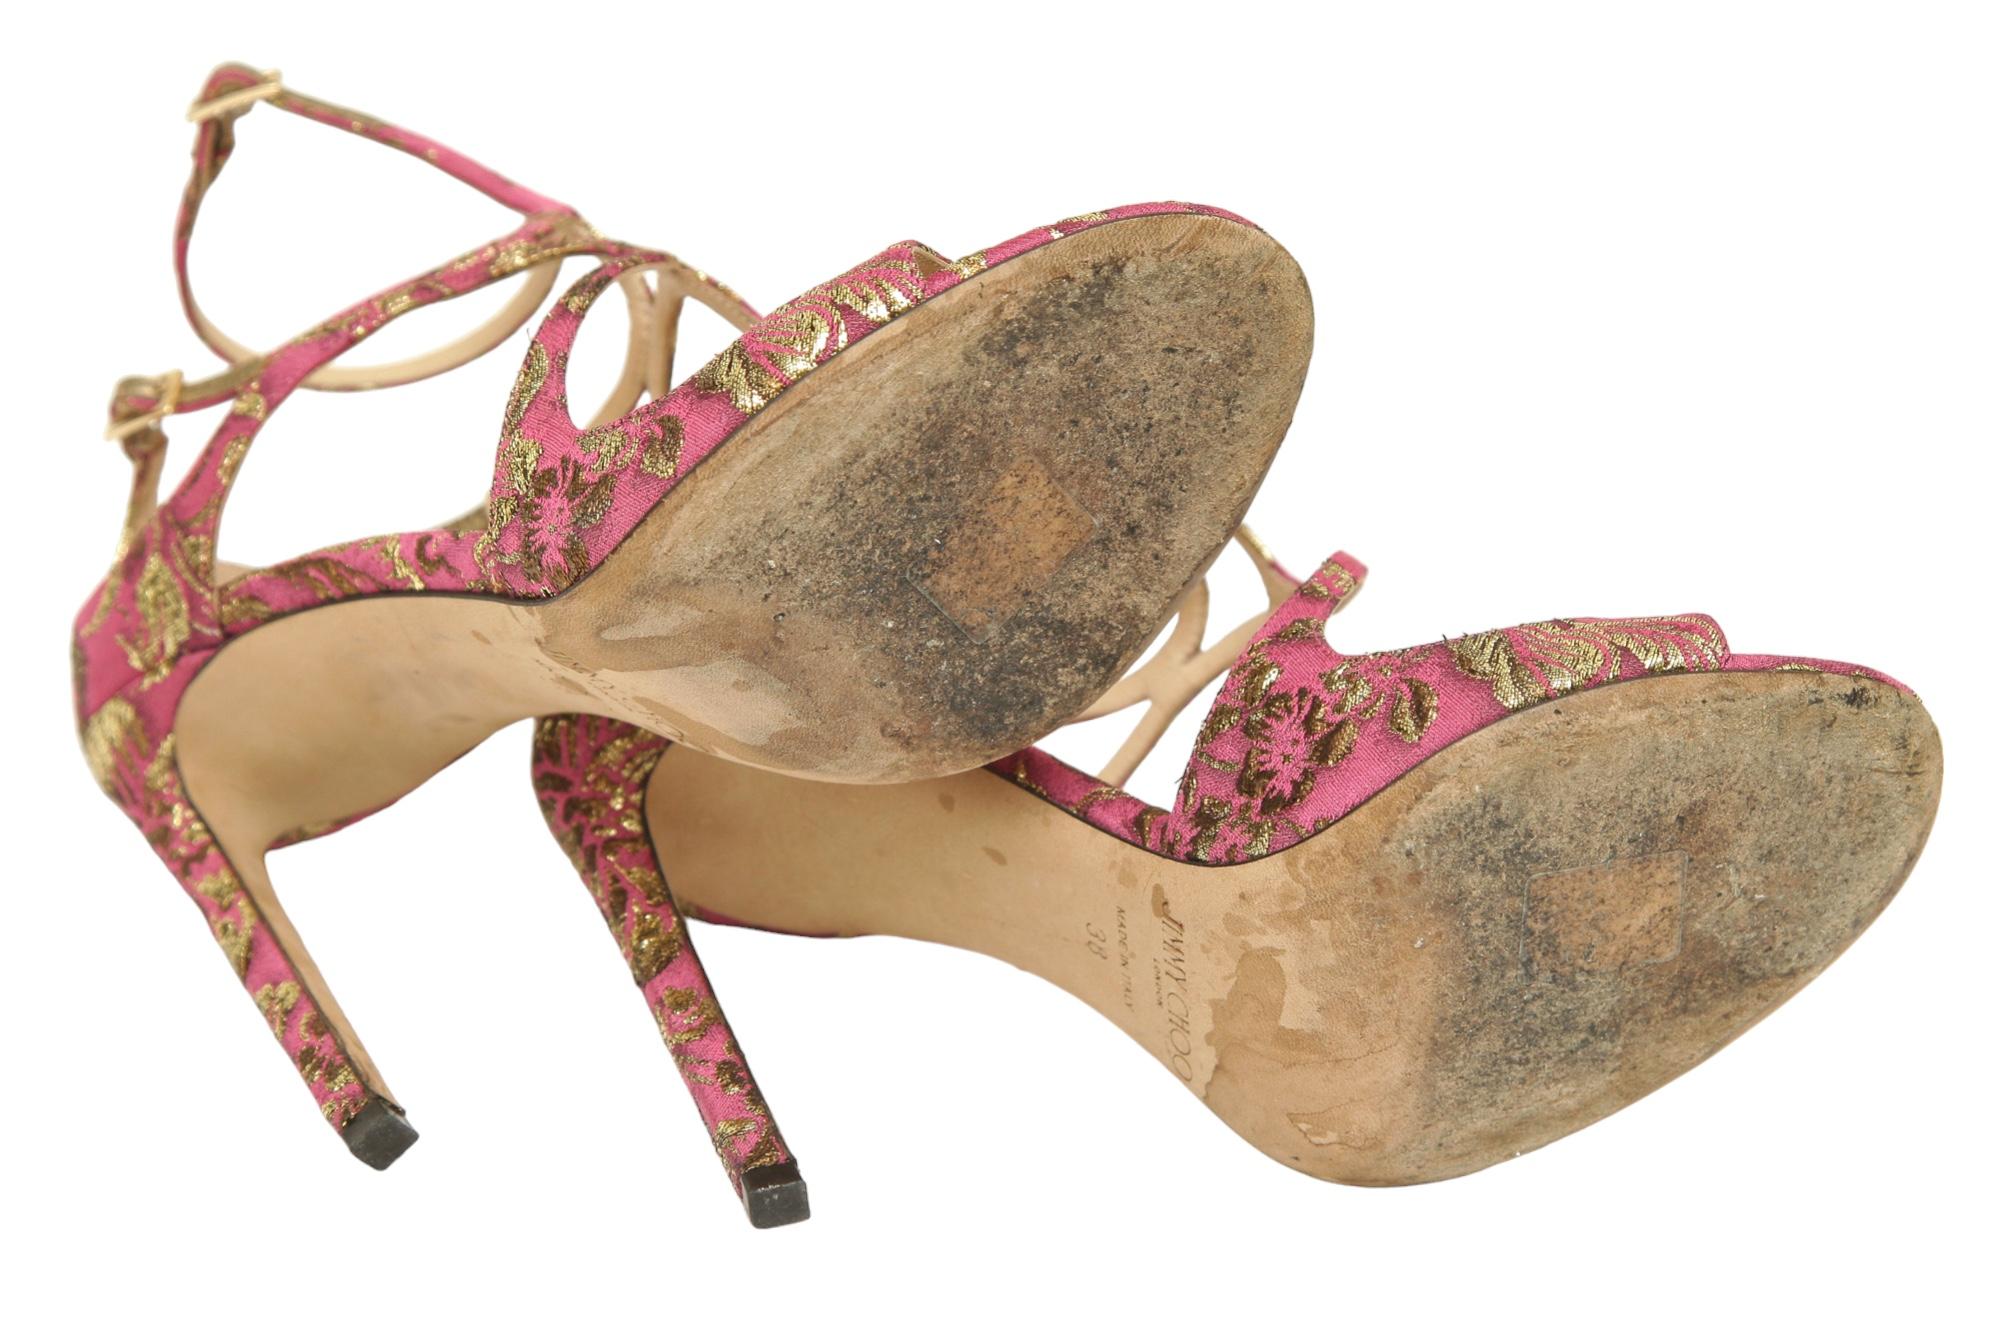 JIMMY CHOO Sandals Brocade Pink Gold Metallic LANCER Heels Leather Strappy 38 For Sale 6